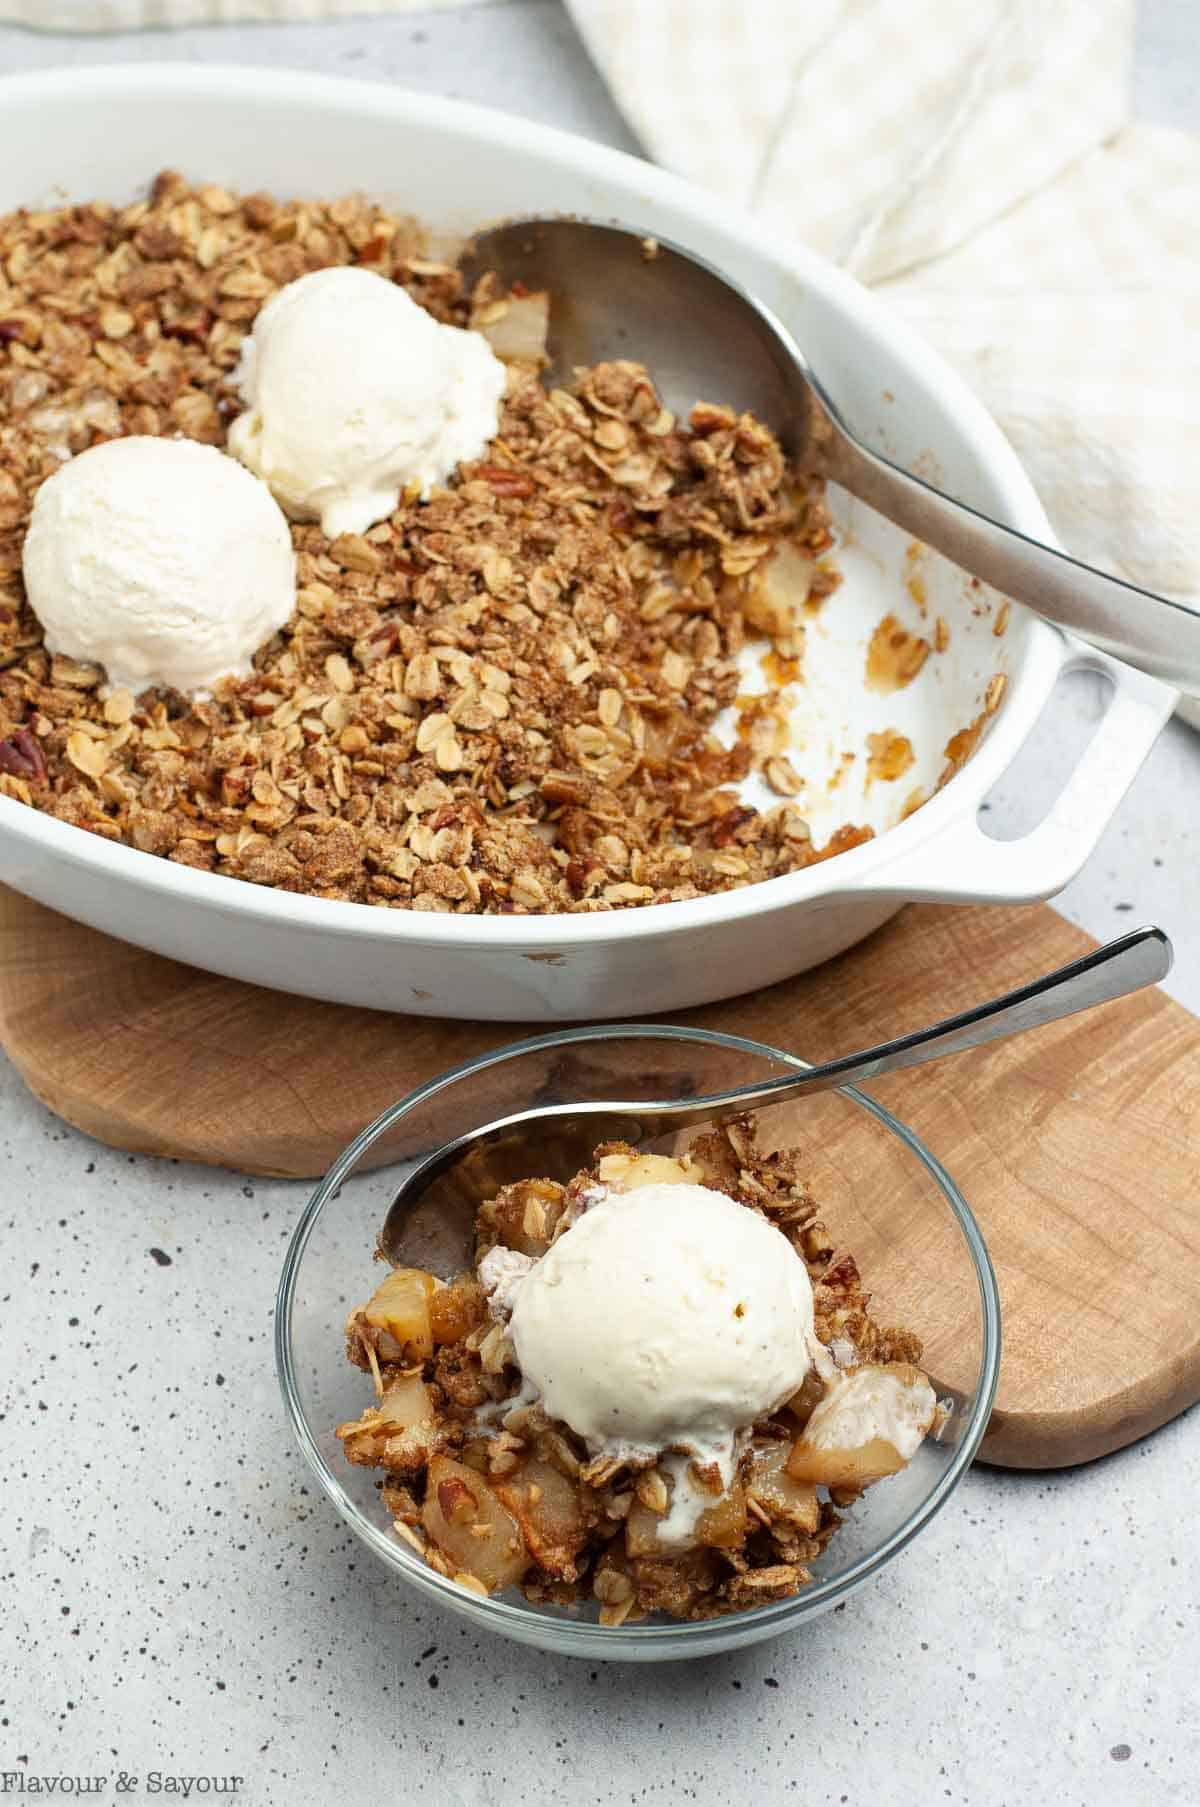 Overhead view of a bowl of pecan pear crisp with ice cream with a baking dish in the background.